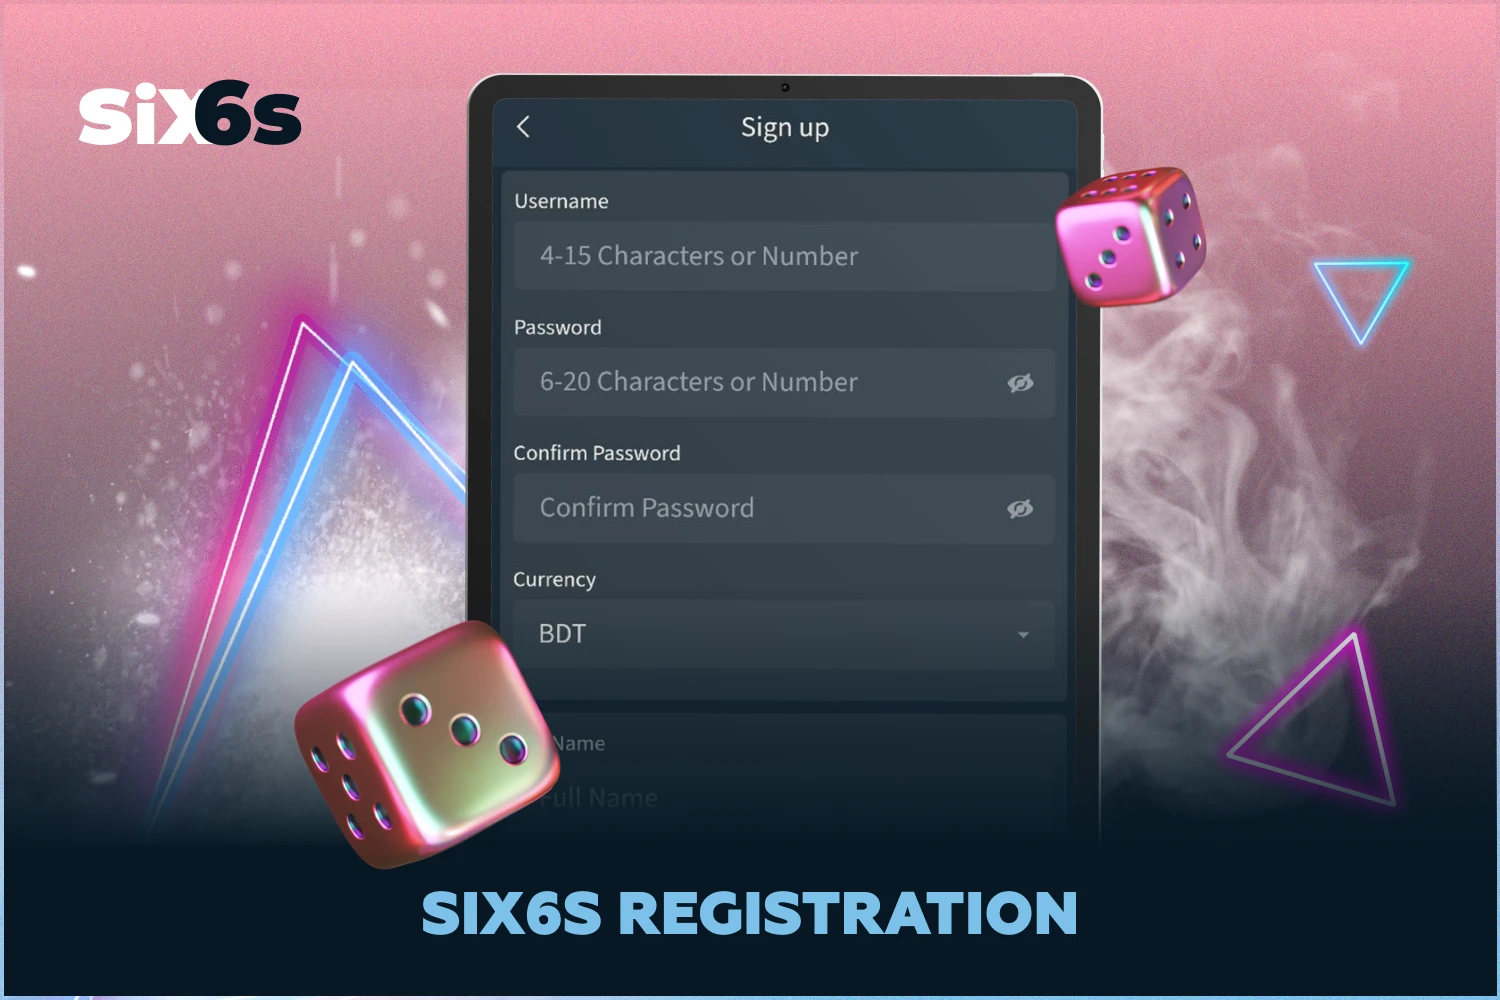 In order to start betting or playing casino games on the Six6s website, every Bangladeshi user must create a personalized account